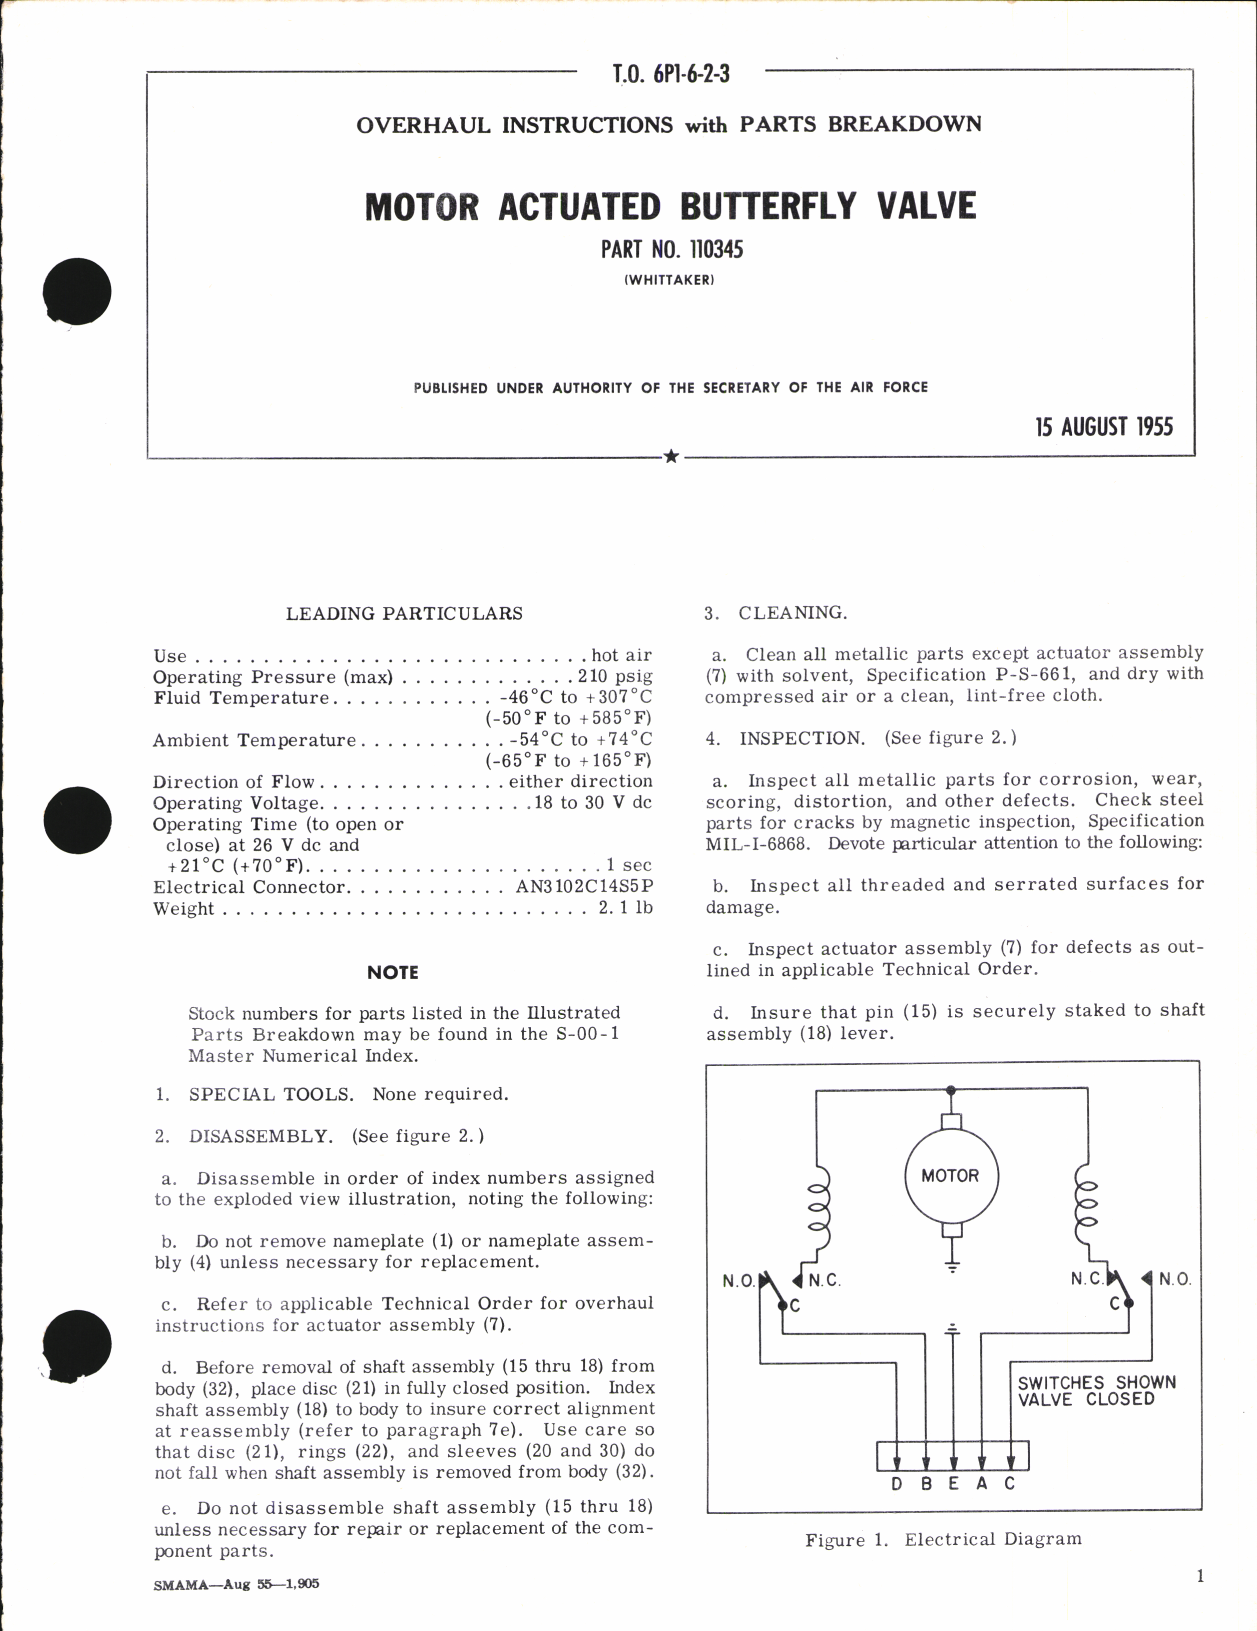 Sample page 1 from AirCorps Library document: Overhaul Instructions with Parts Breakdown for Motor Actuated Butterfly Valve Part No. 110345